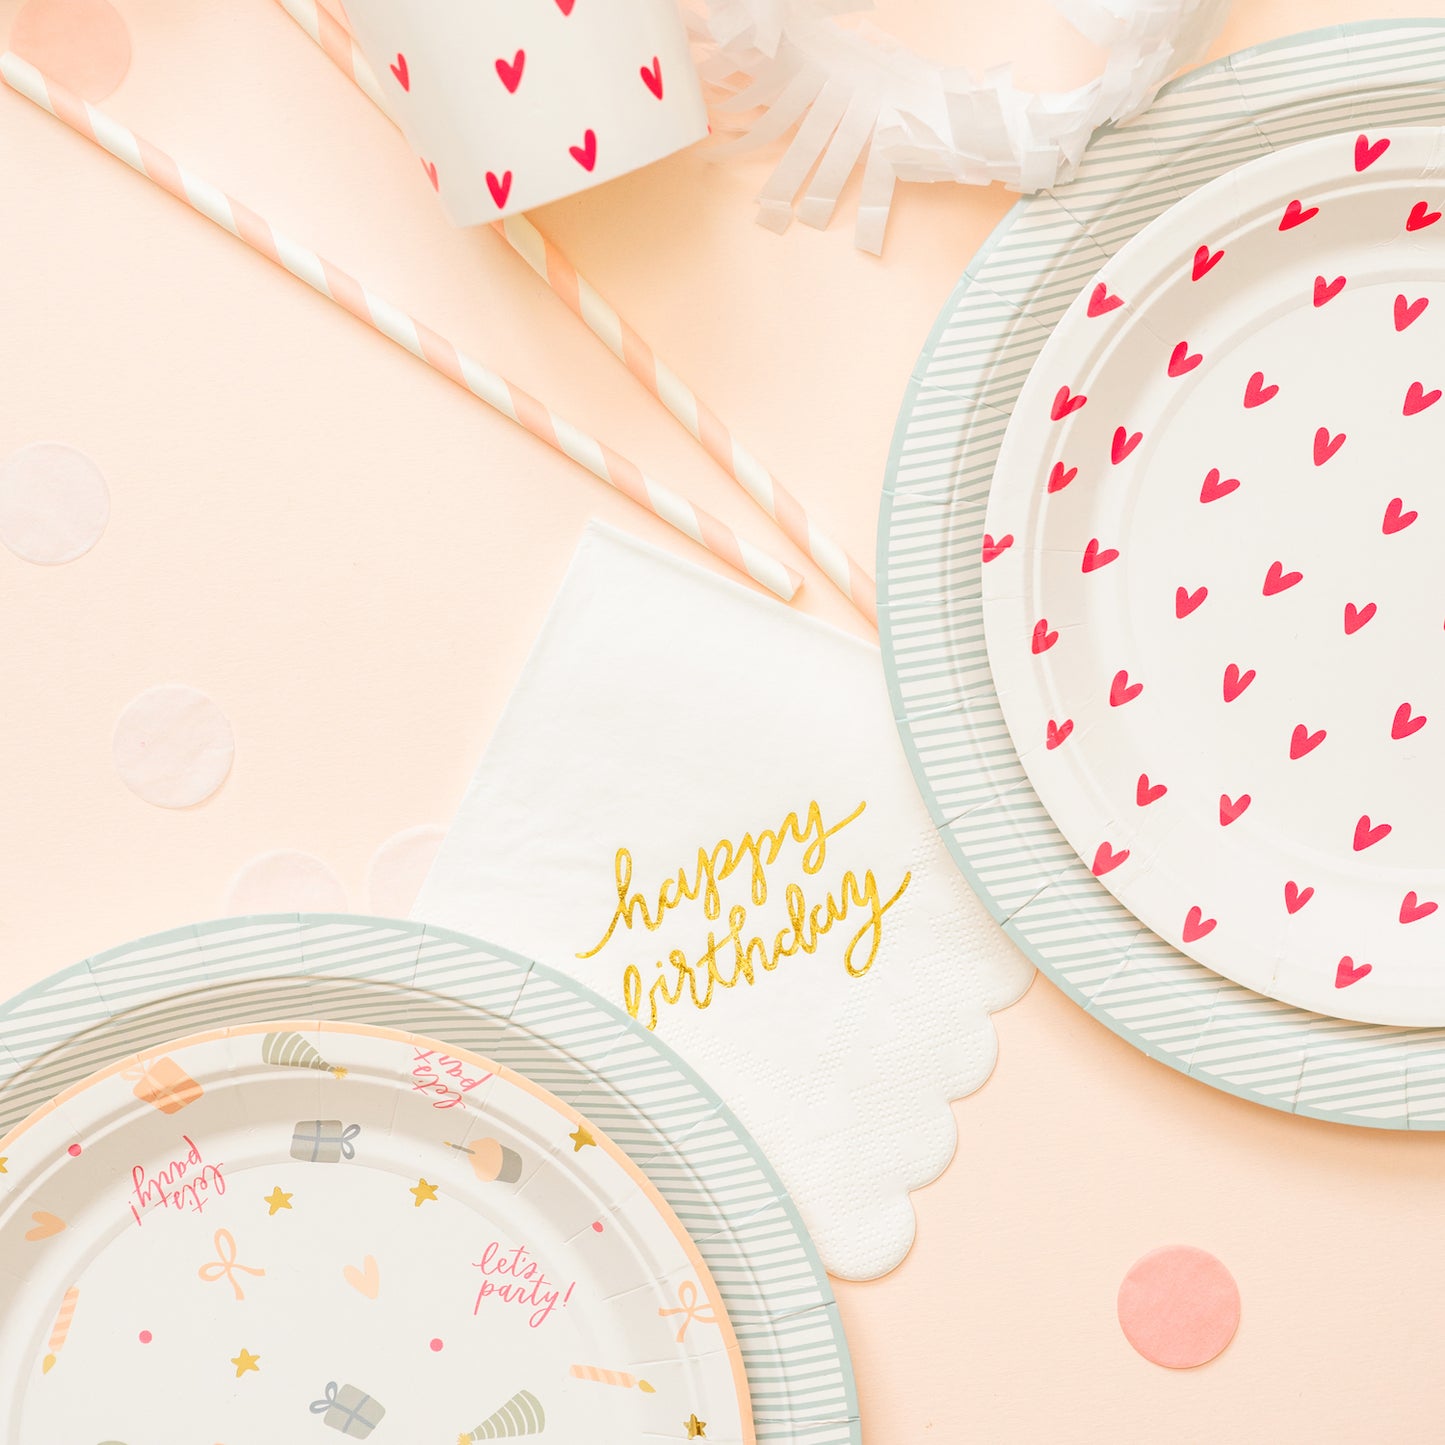 Birthday party celebration with pink and blue stripe plates and napkins